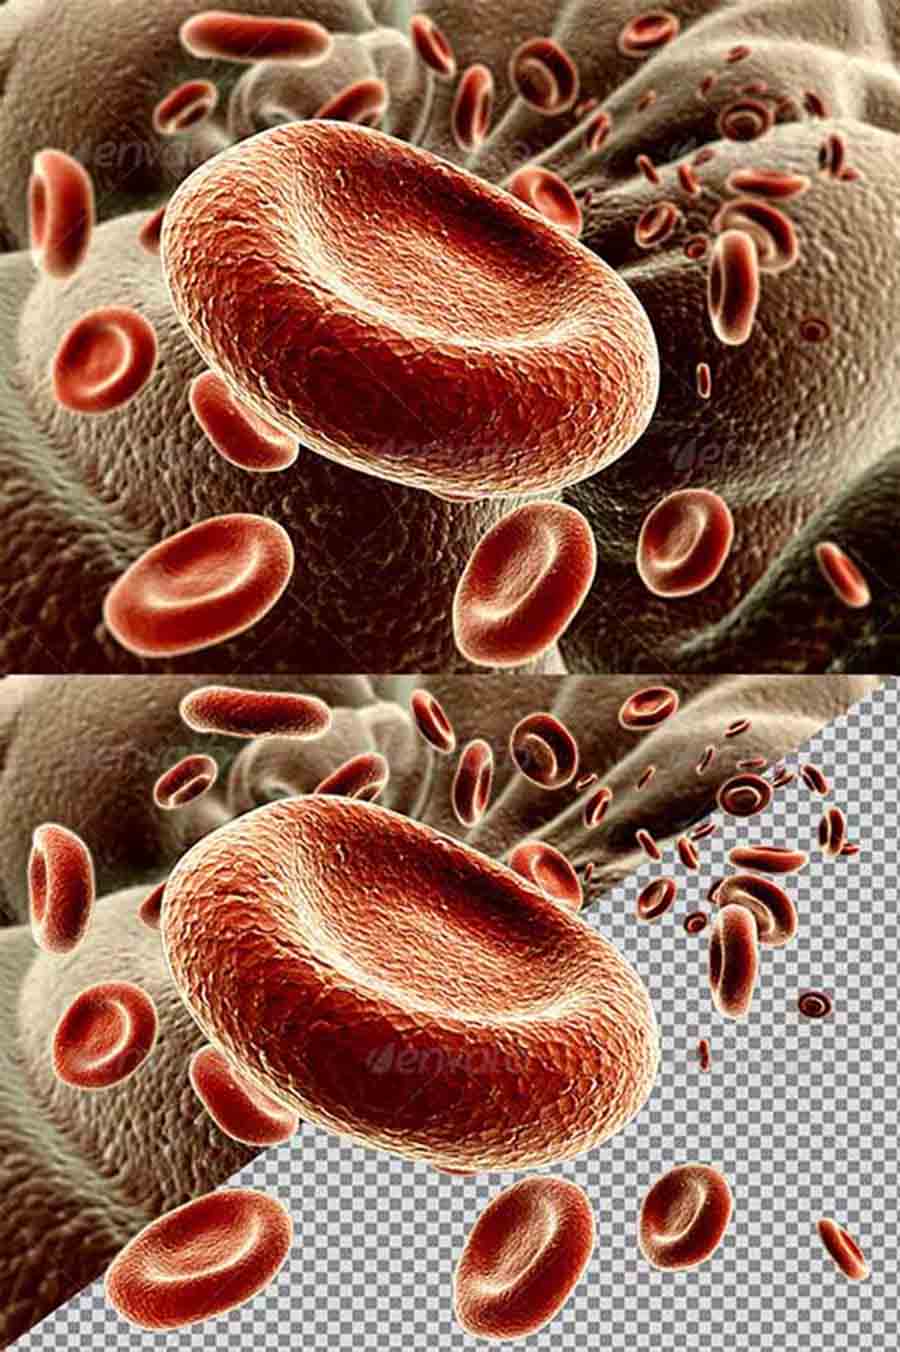 red blood cells copy